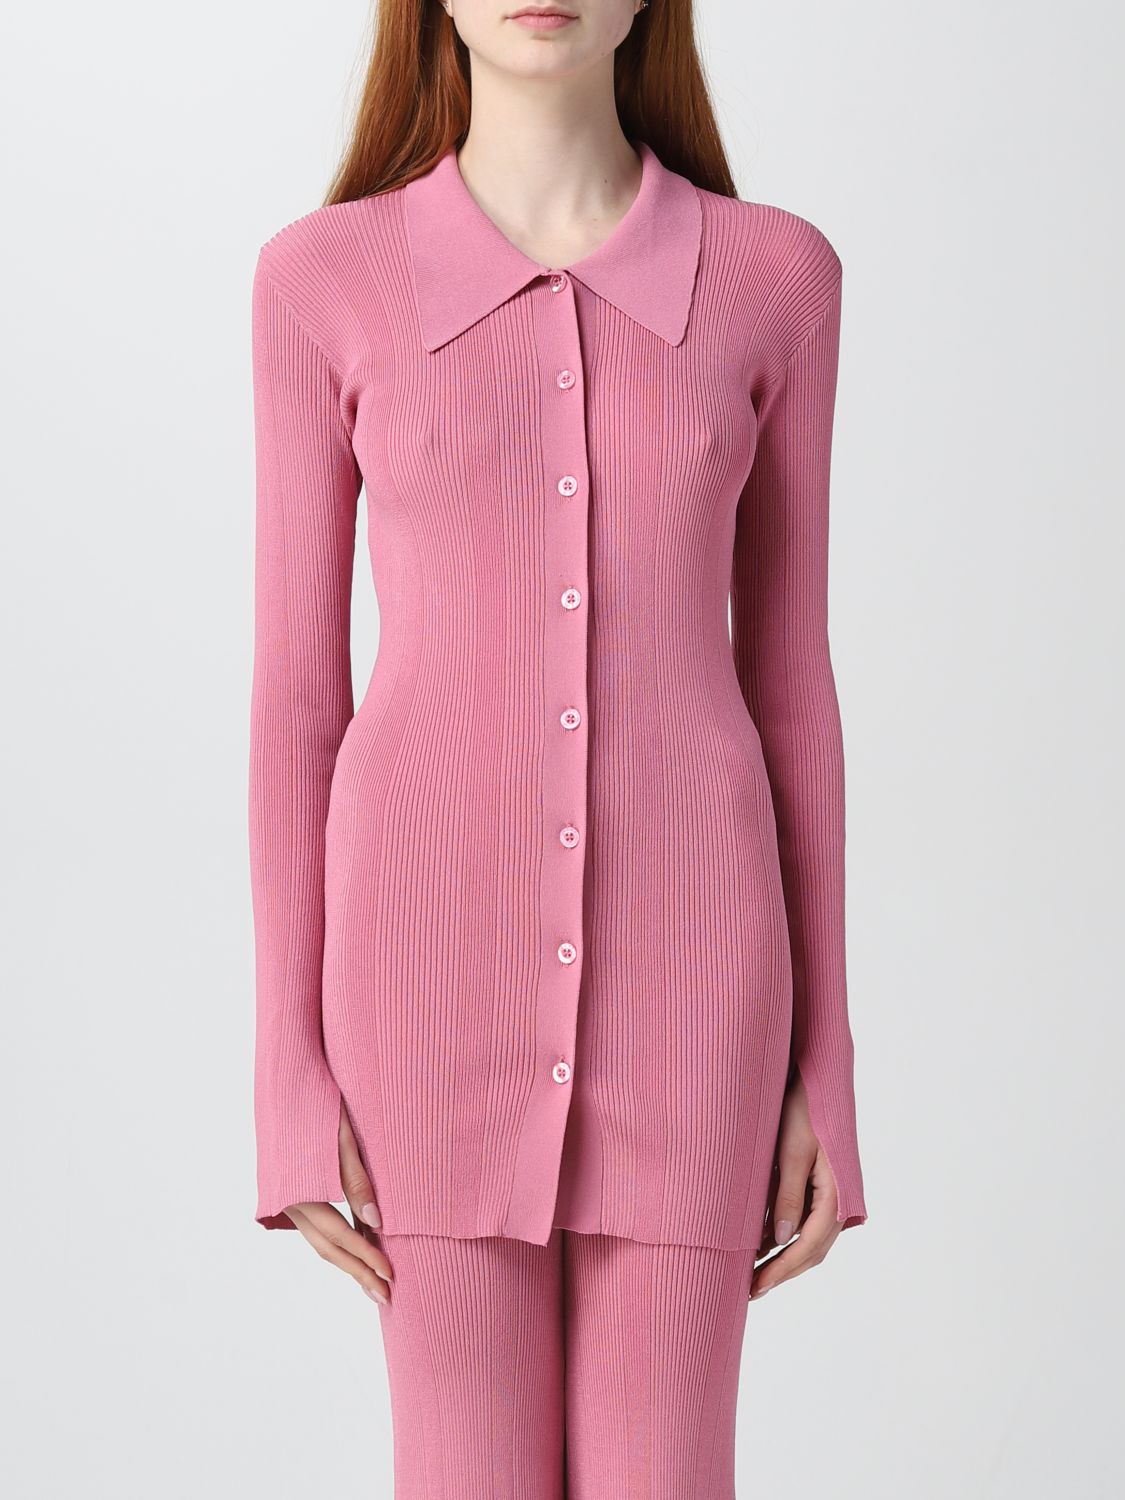 REMAIN CARDIGAN REMAIN WOMAN COLOR PINK,E19043010